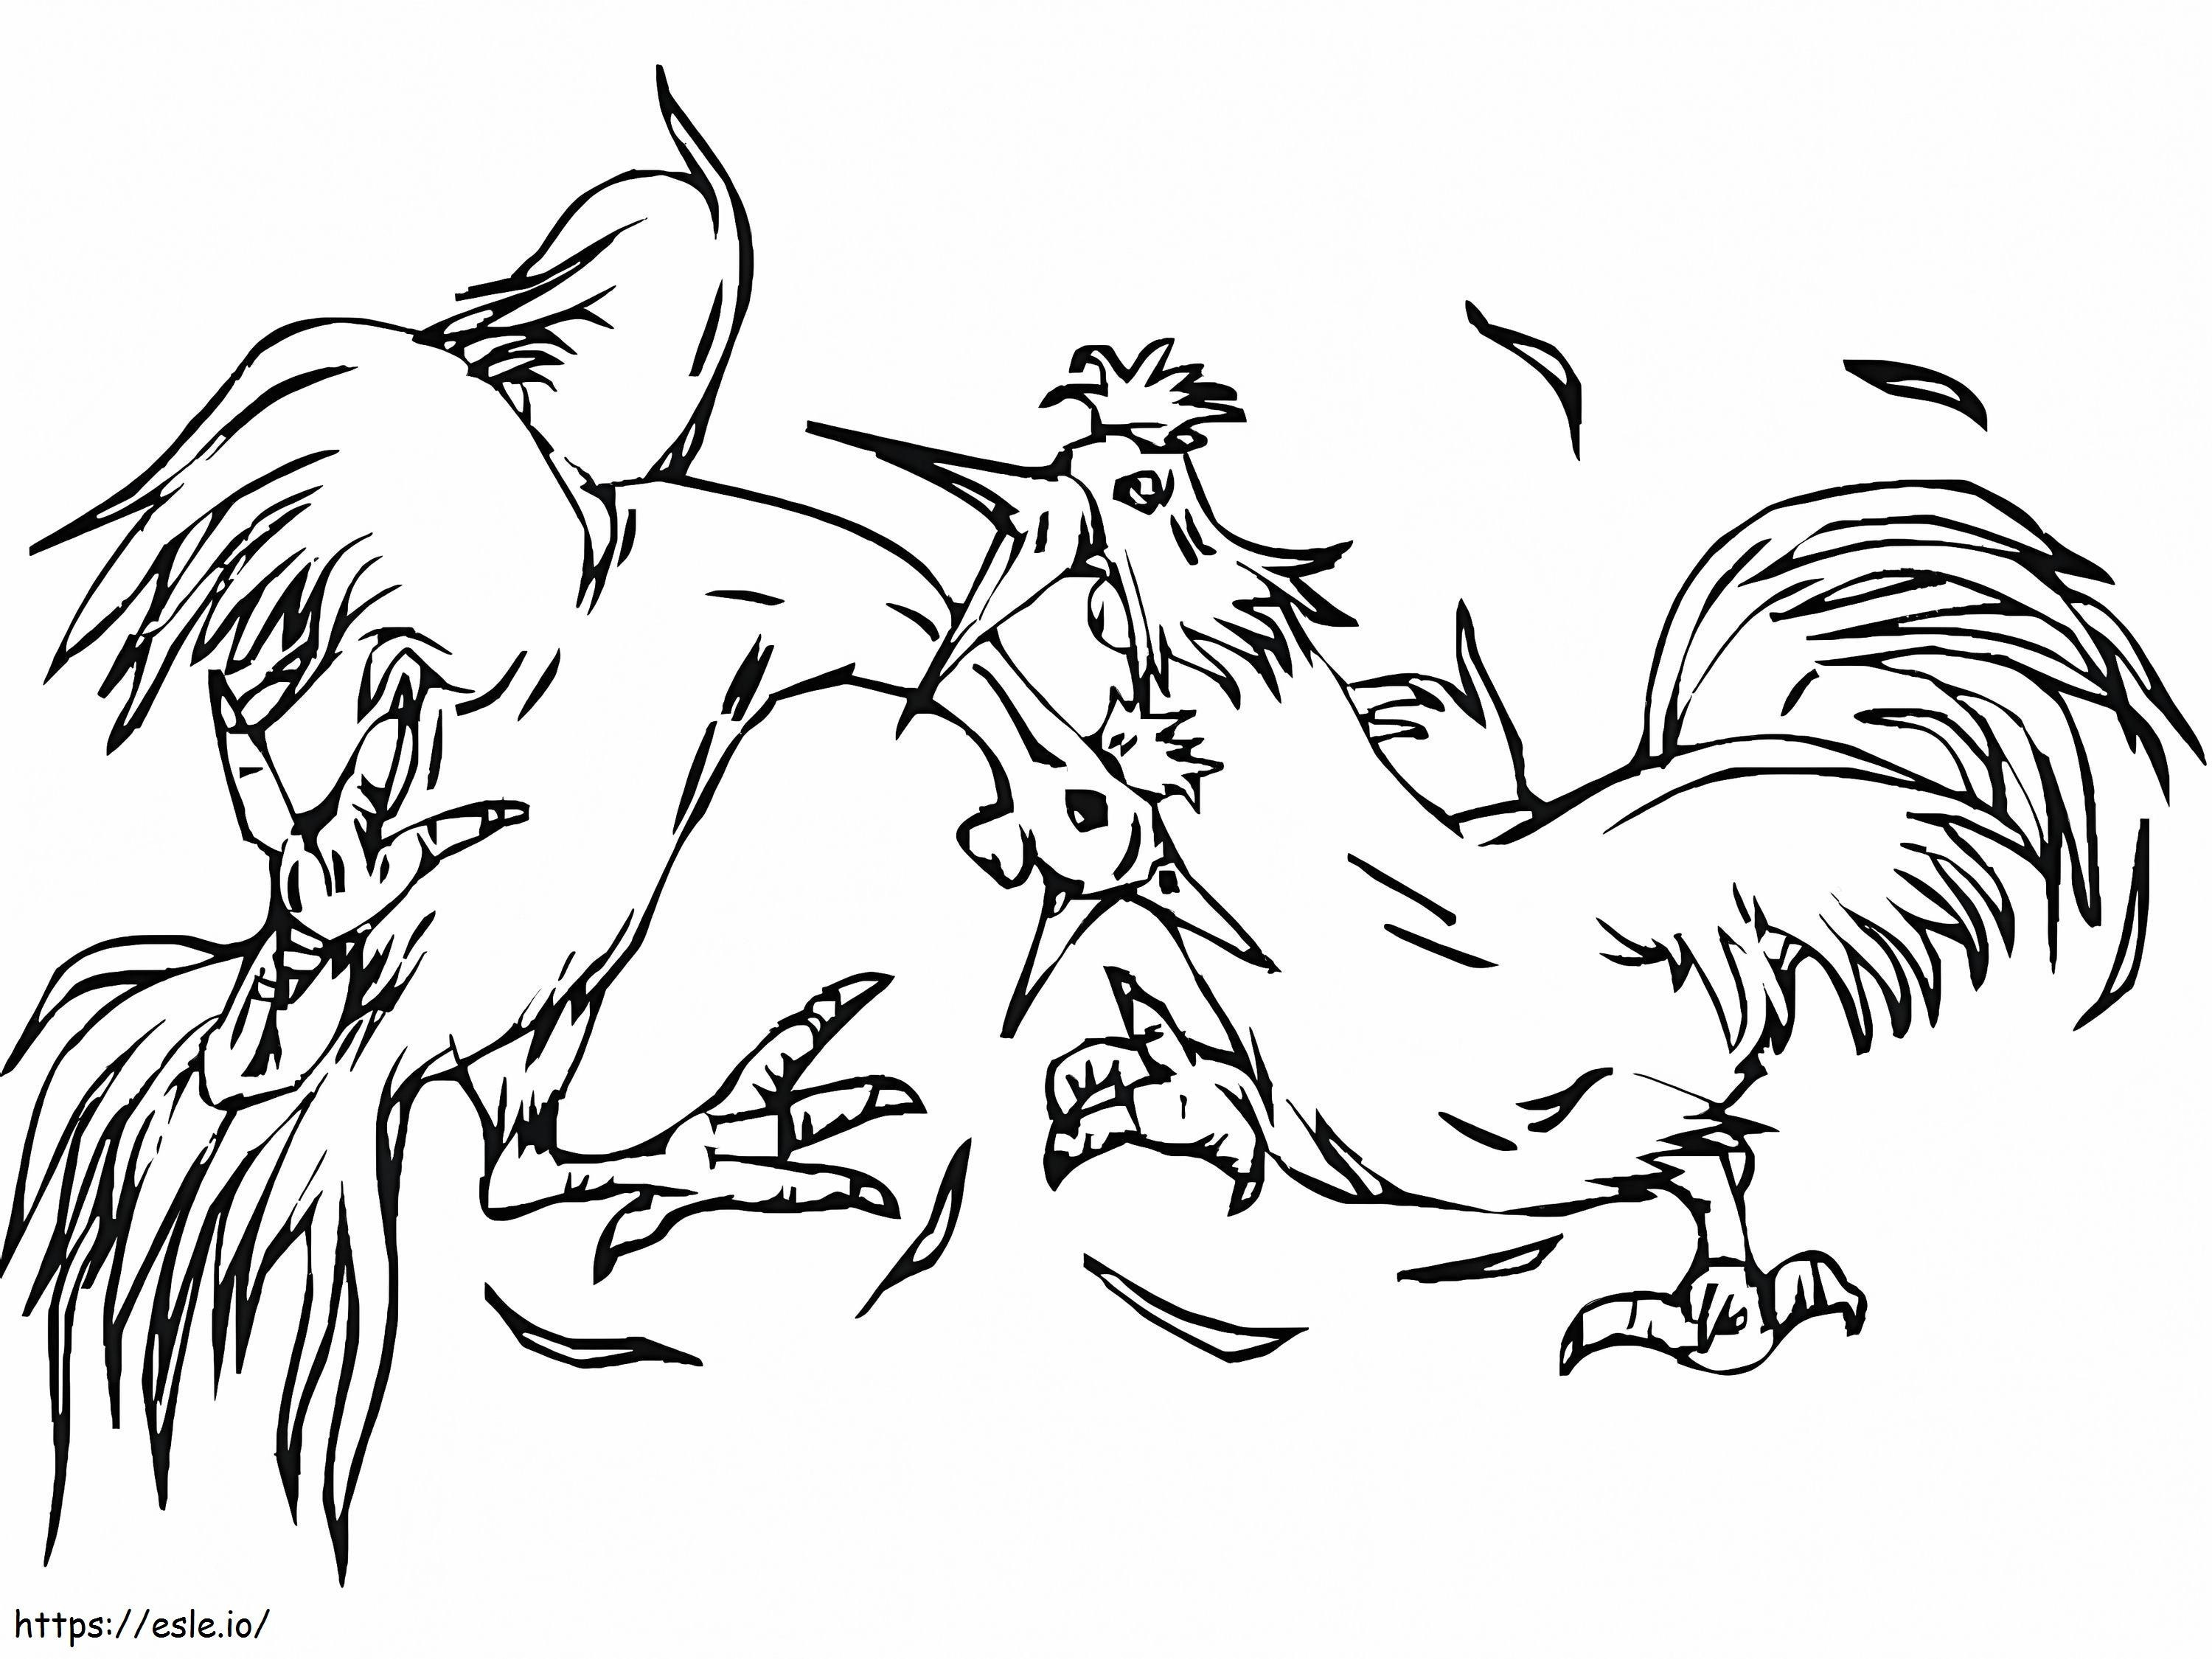 Fighting Roosters coloring page